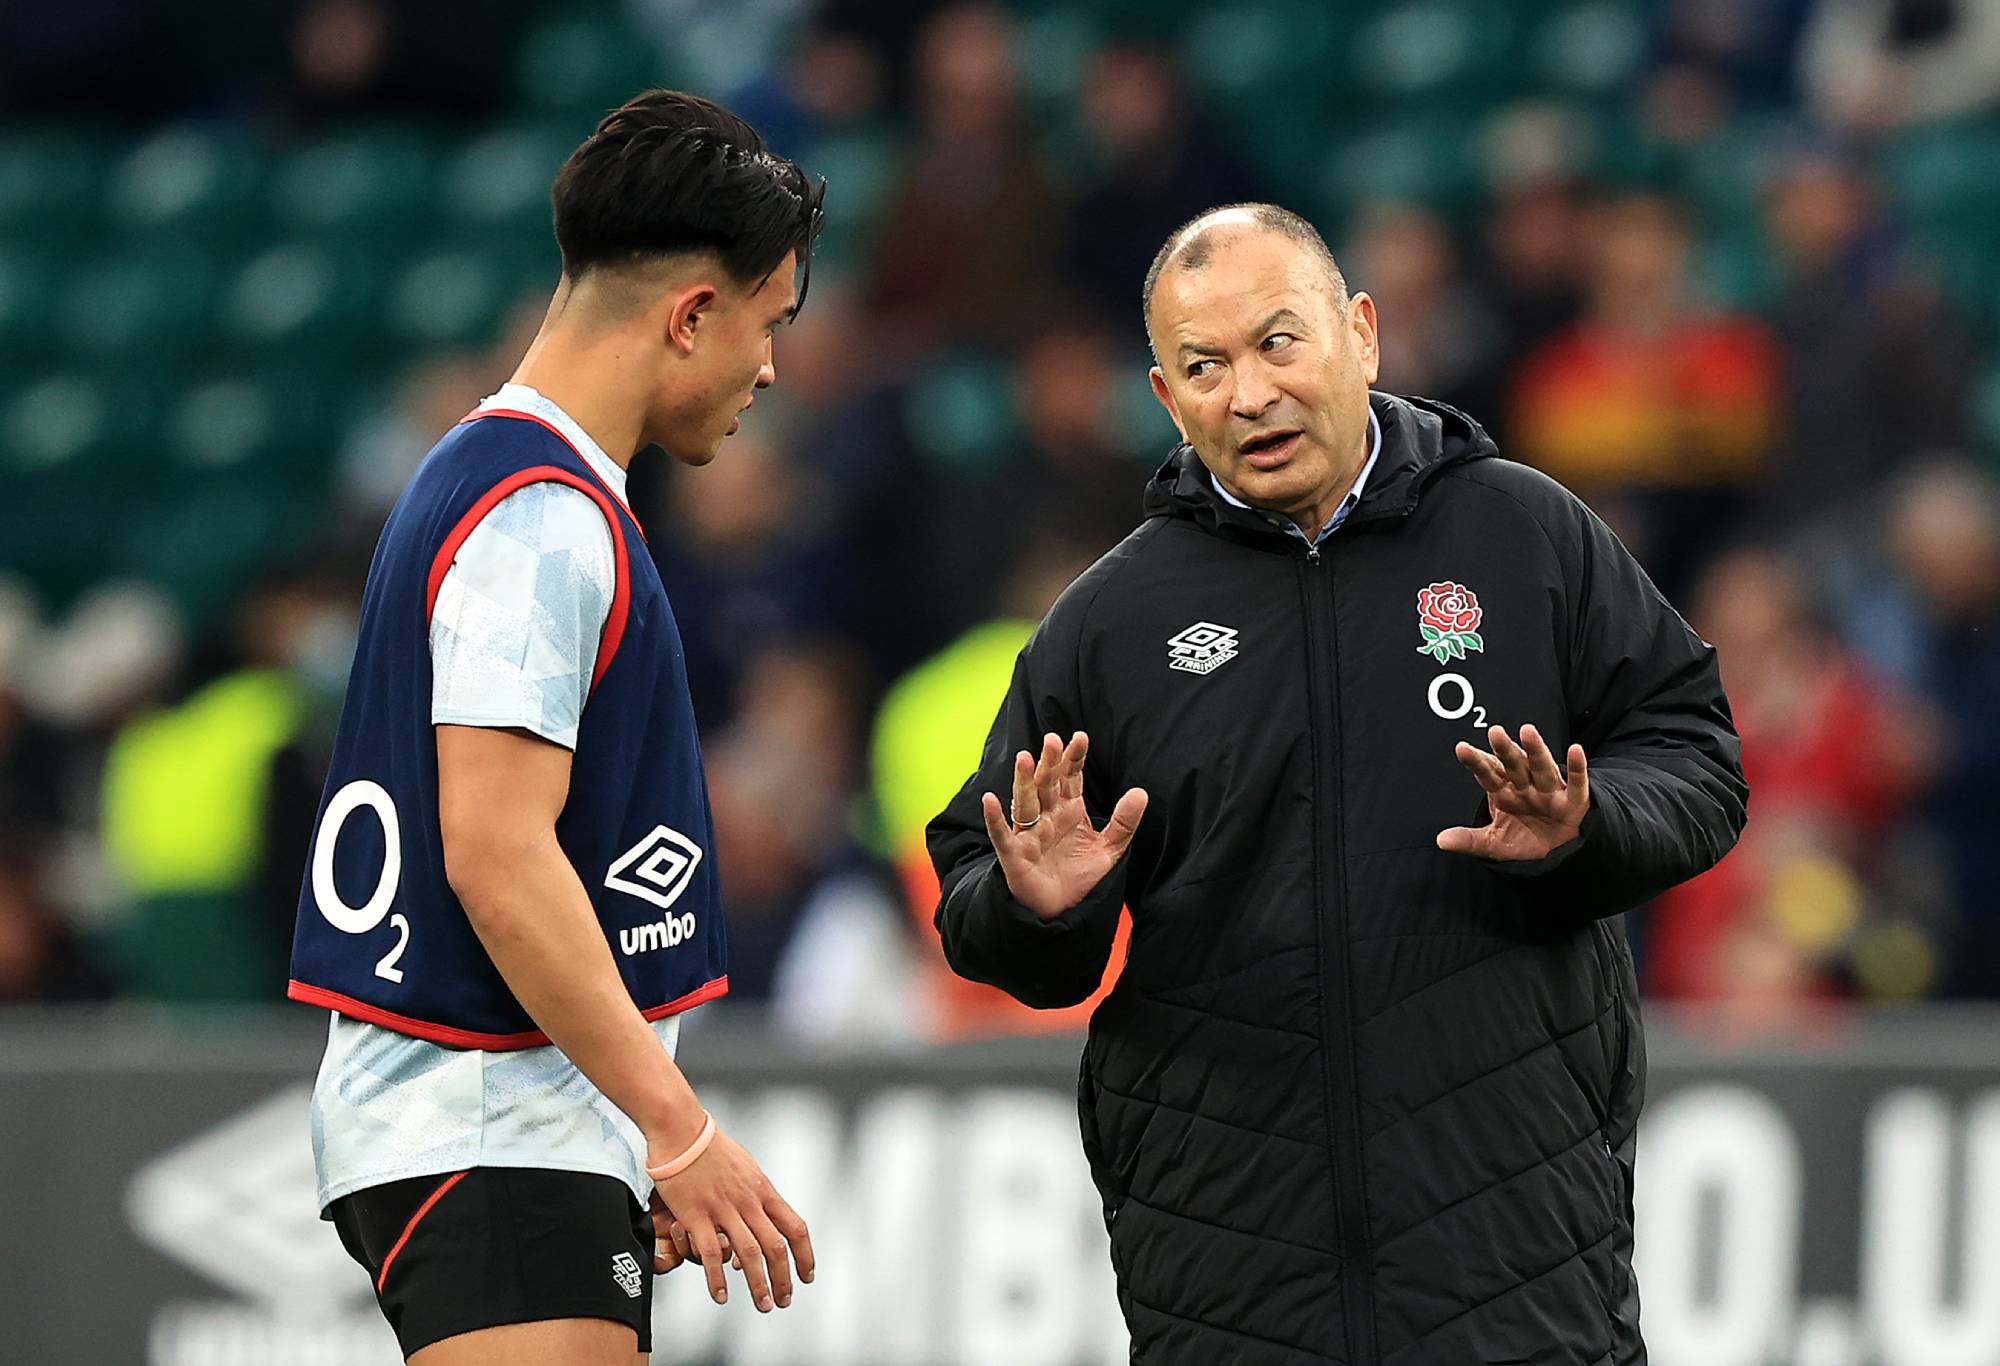 Eddie Jones, the England head coach talks to England standoff, Marcus Smith, prior to the Autumn Nations Series match between England and South Africa at Twickenham Stadium on November 20, 2021 in London, England. (Photo by David Rogers/Getty Images)